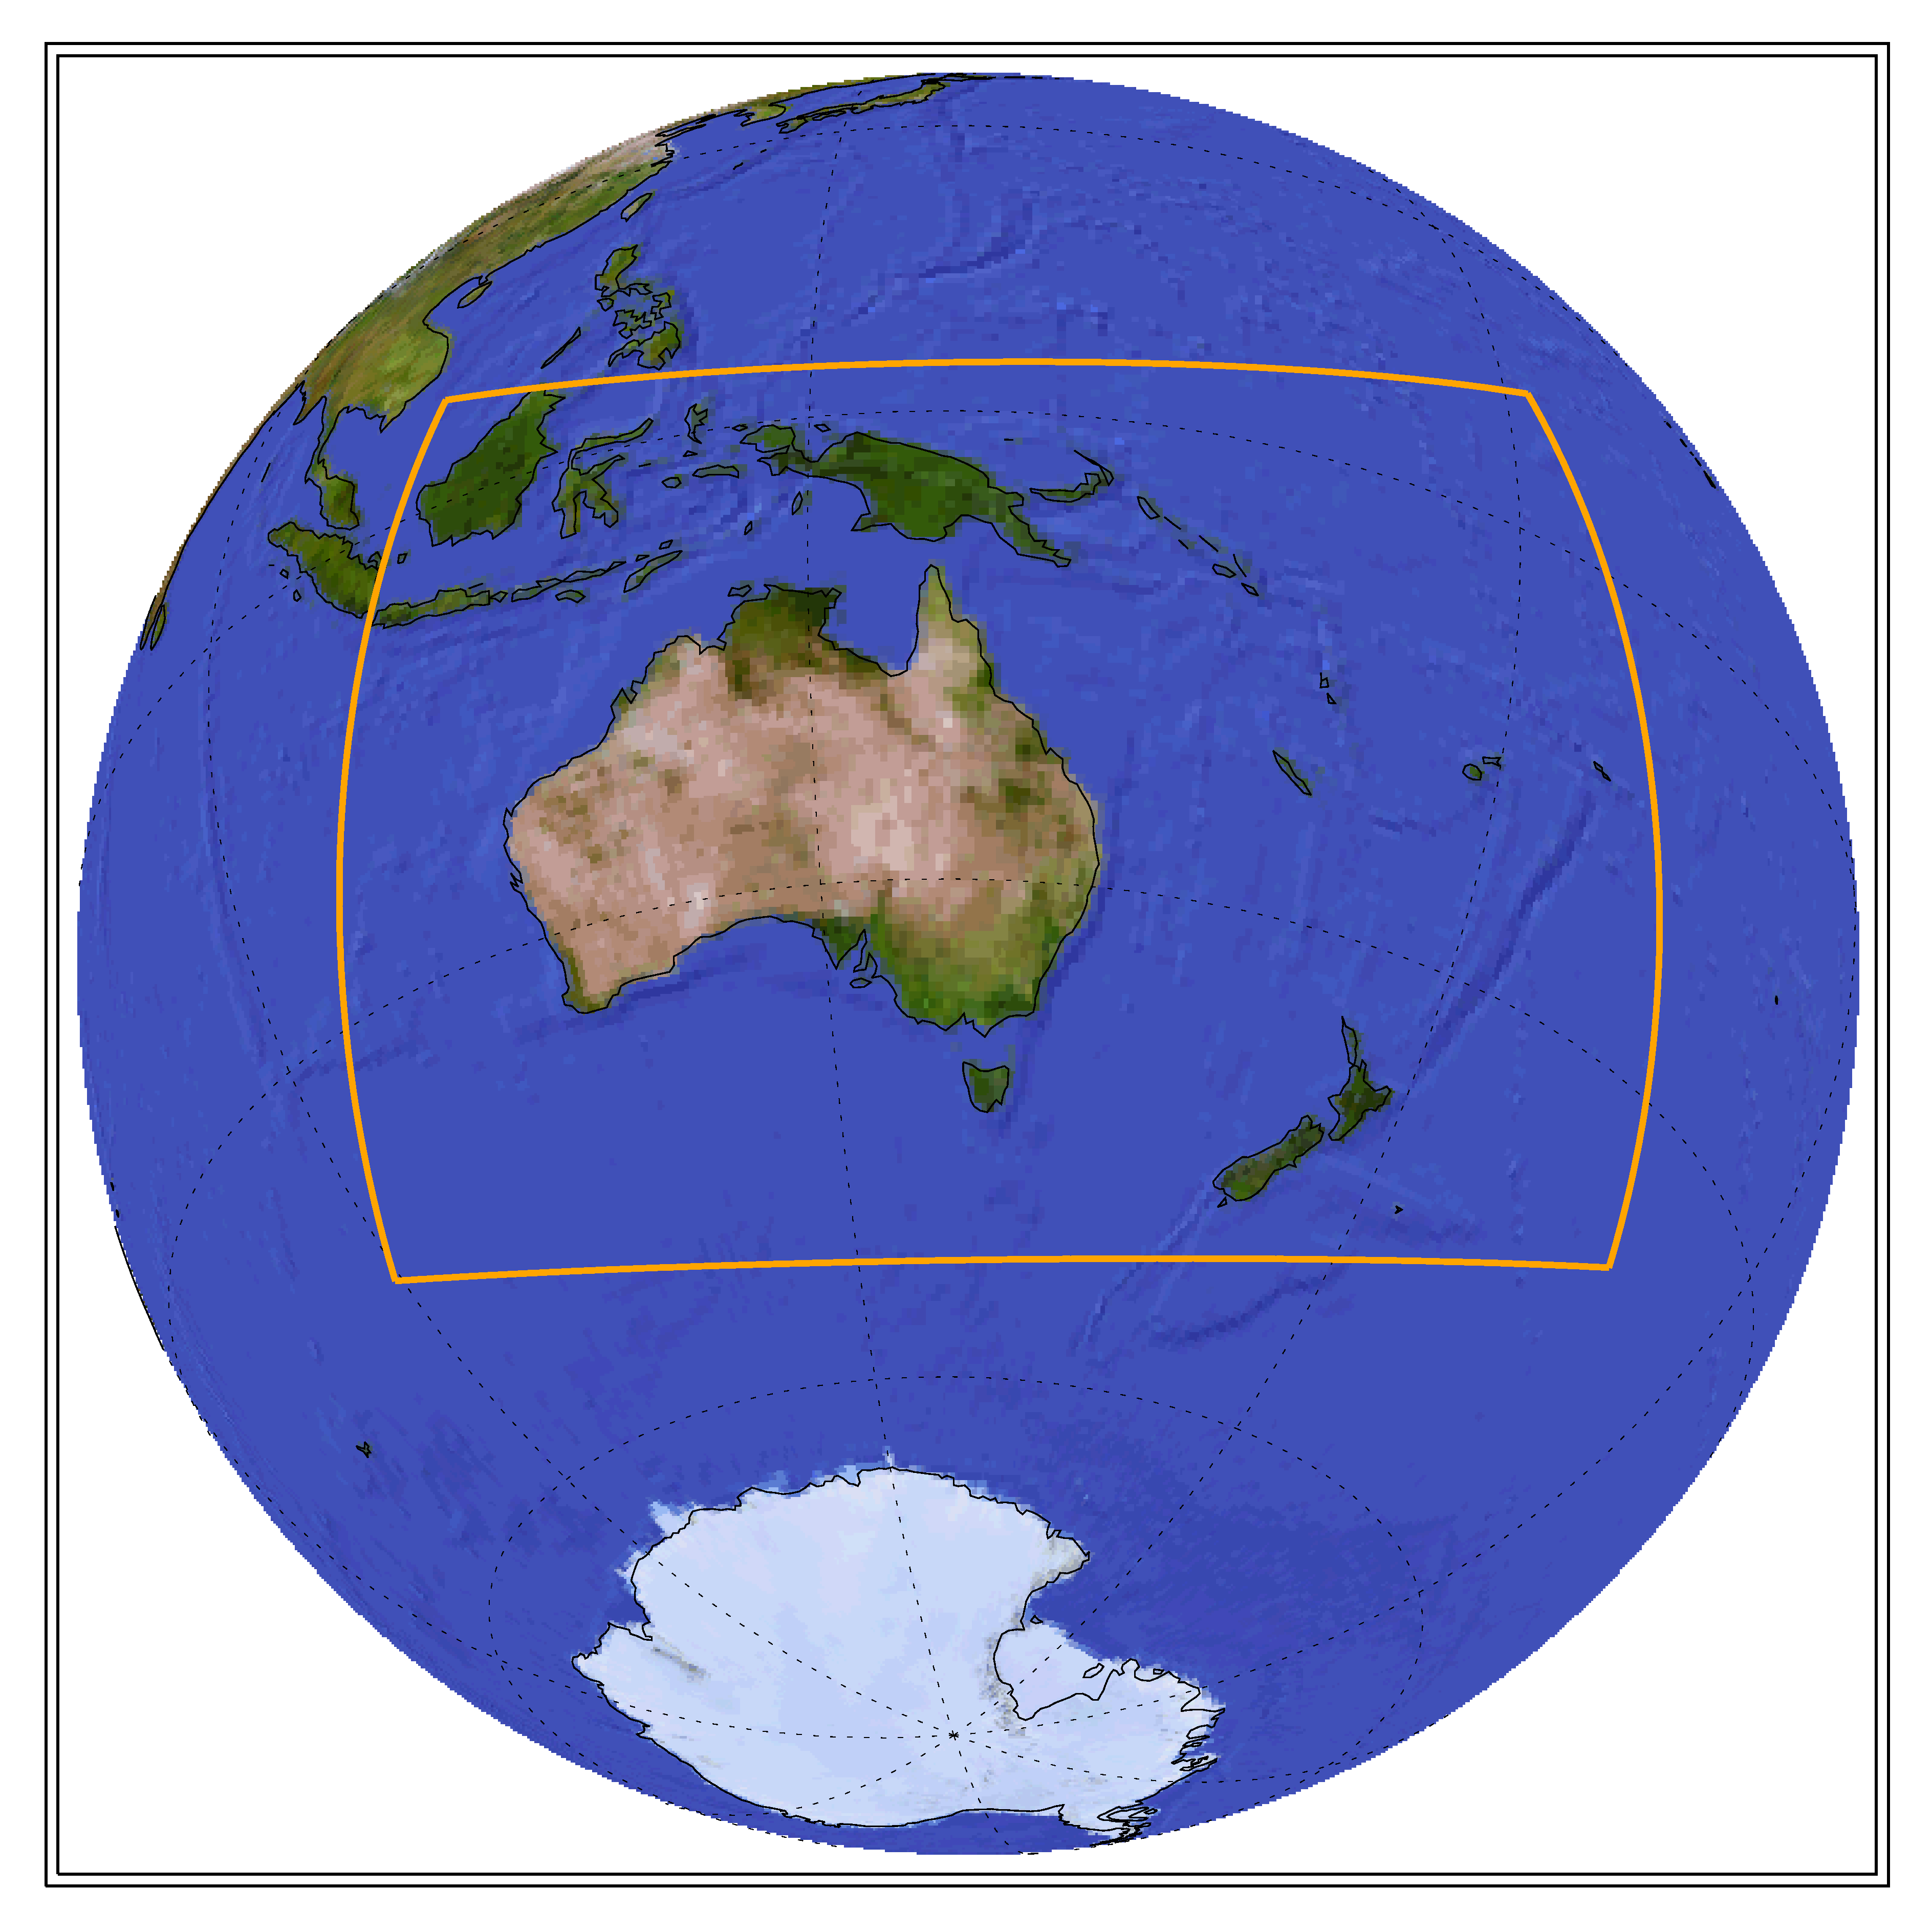 Globe showing the CORDEX domain of Australasia